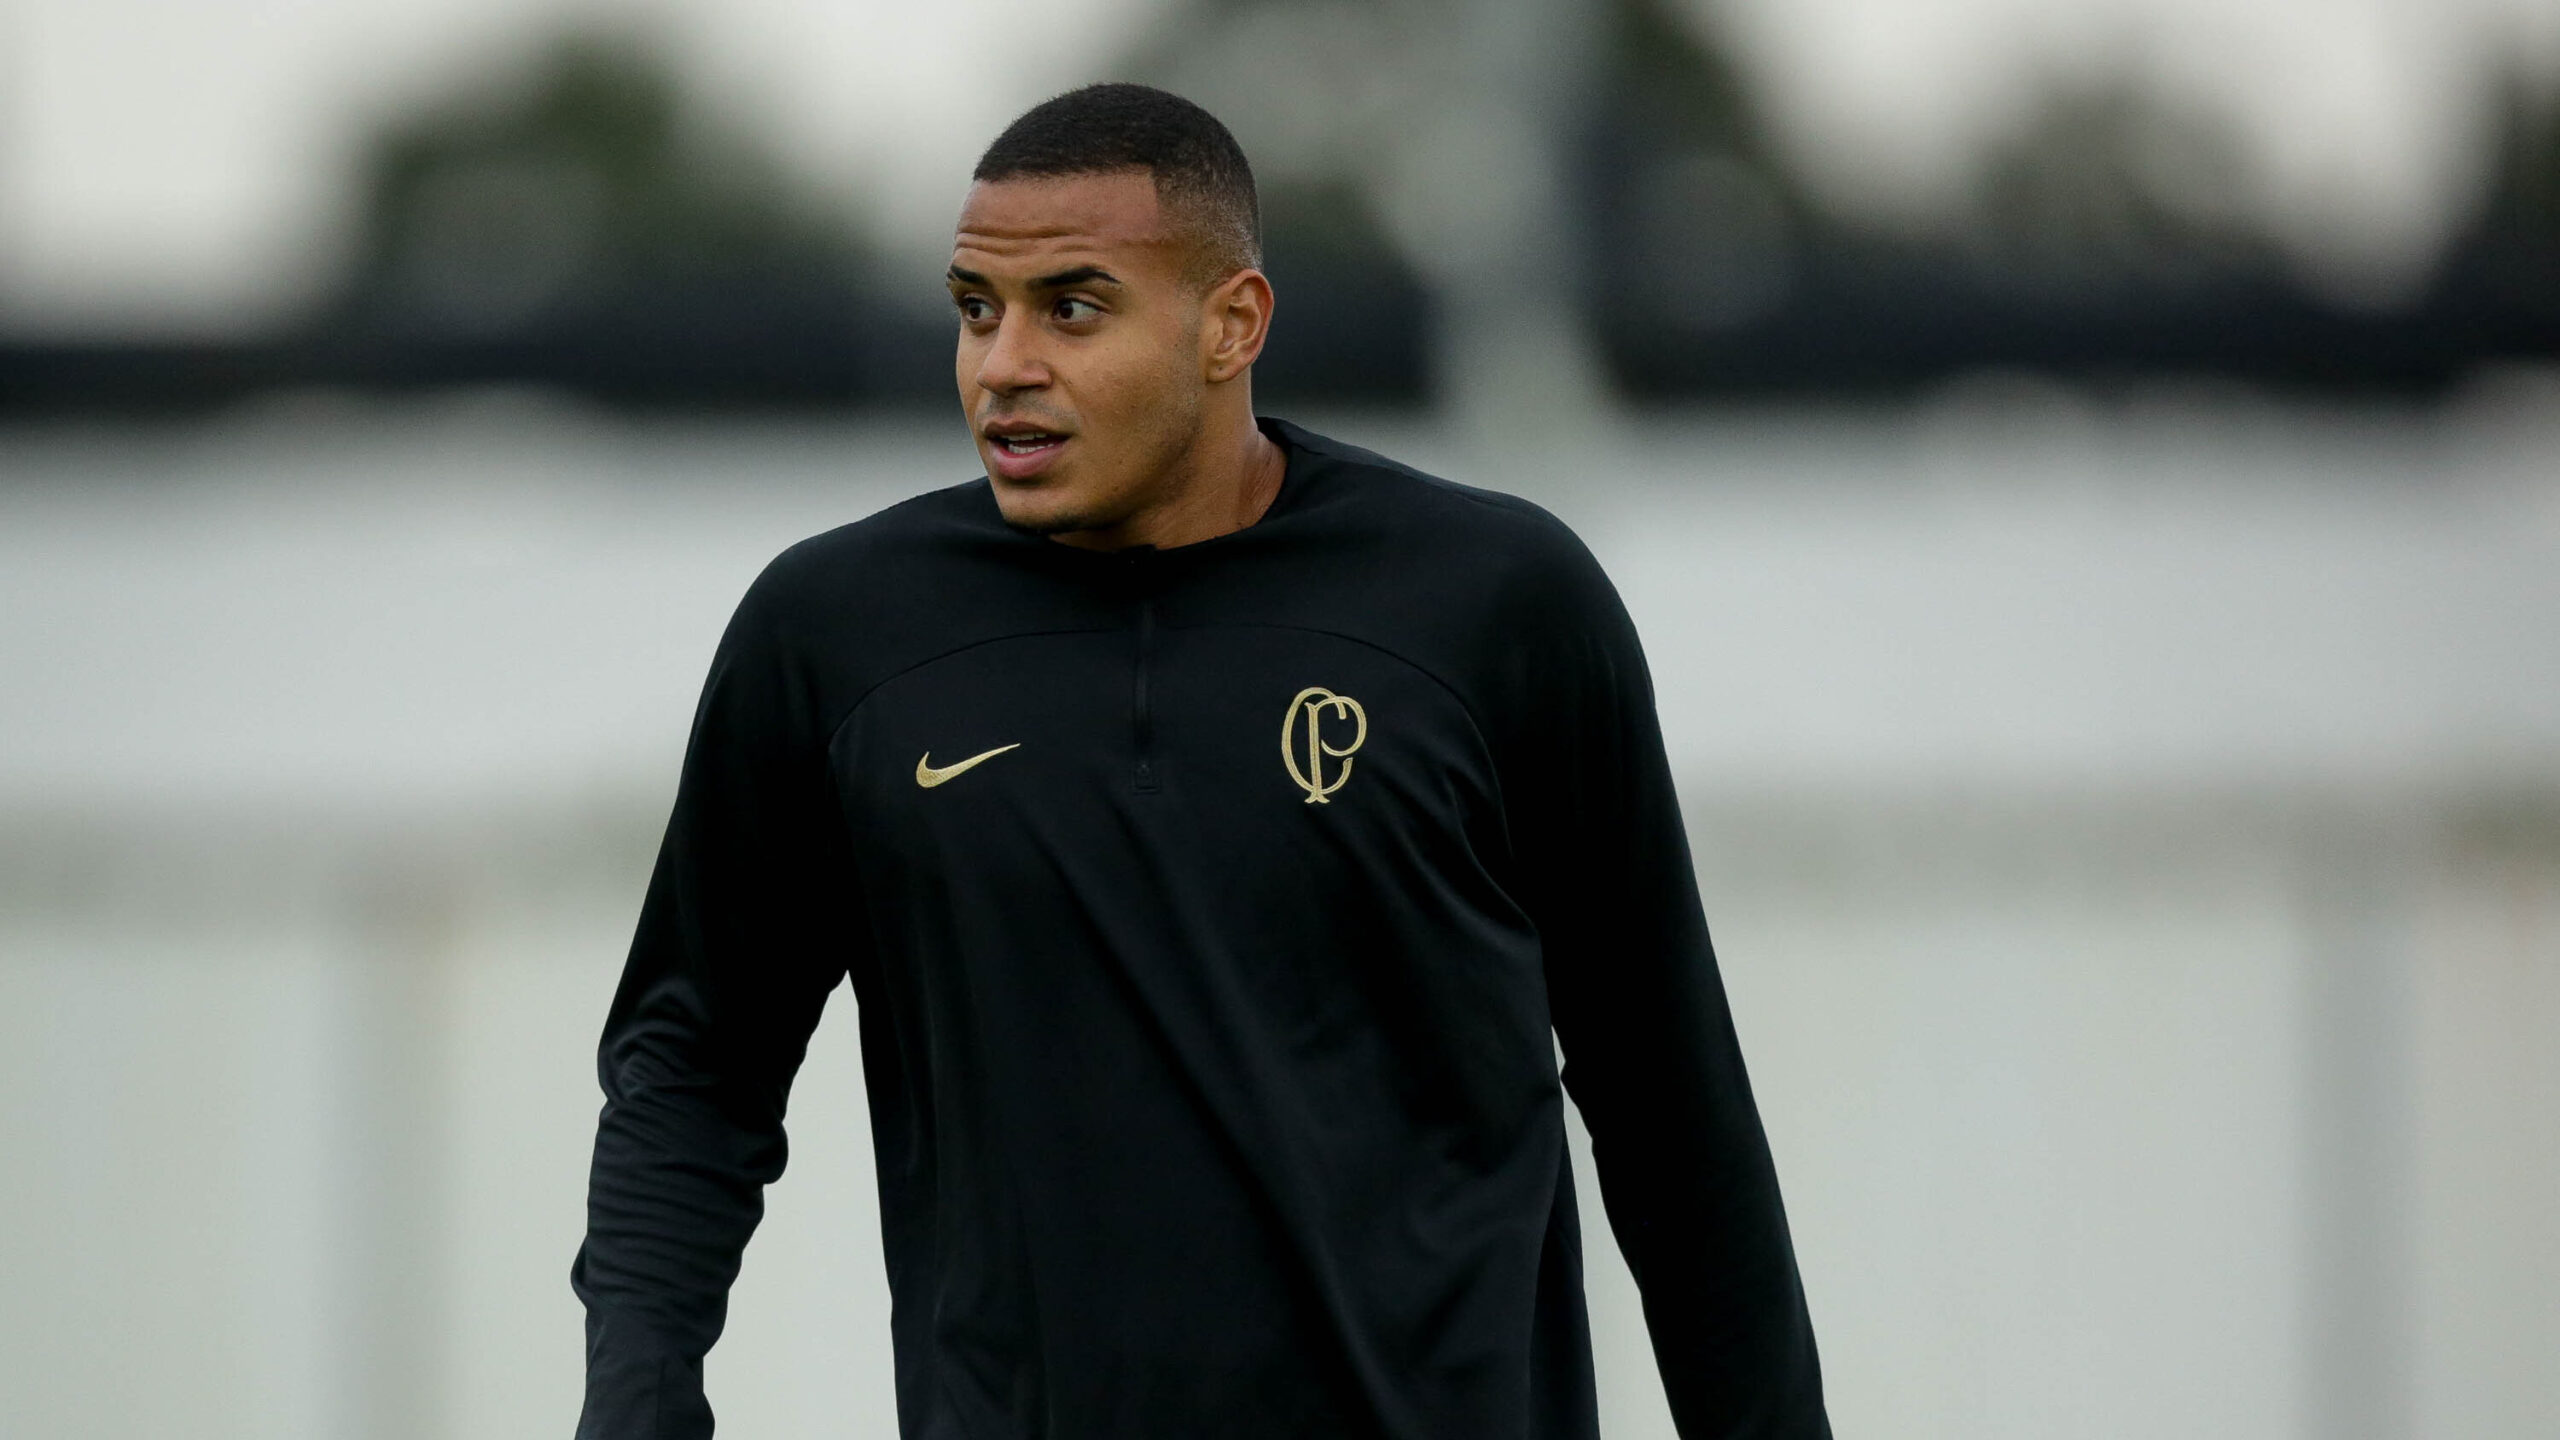 Fiorentina, in a bid to replace Igor, have initiated contacts for 21-year-old Murllo, but no matter what, Corinthians do not intend to budge an inch.